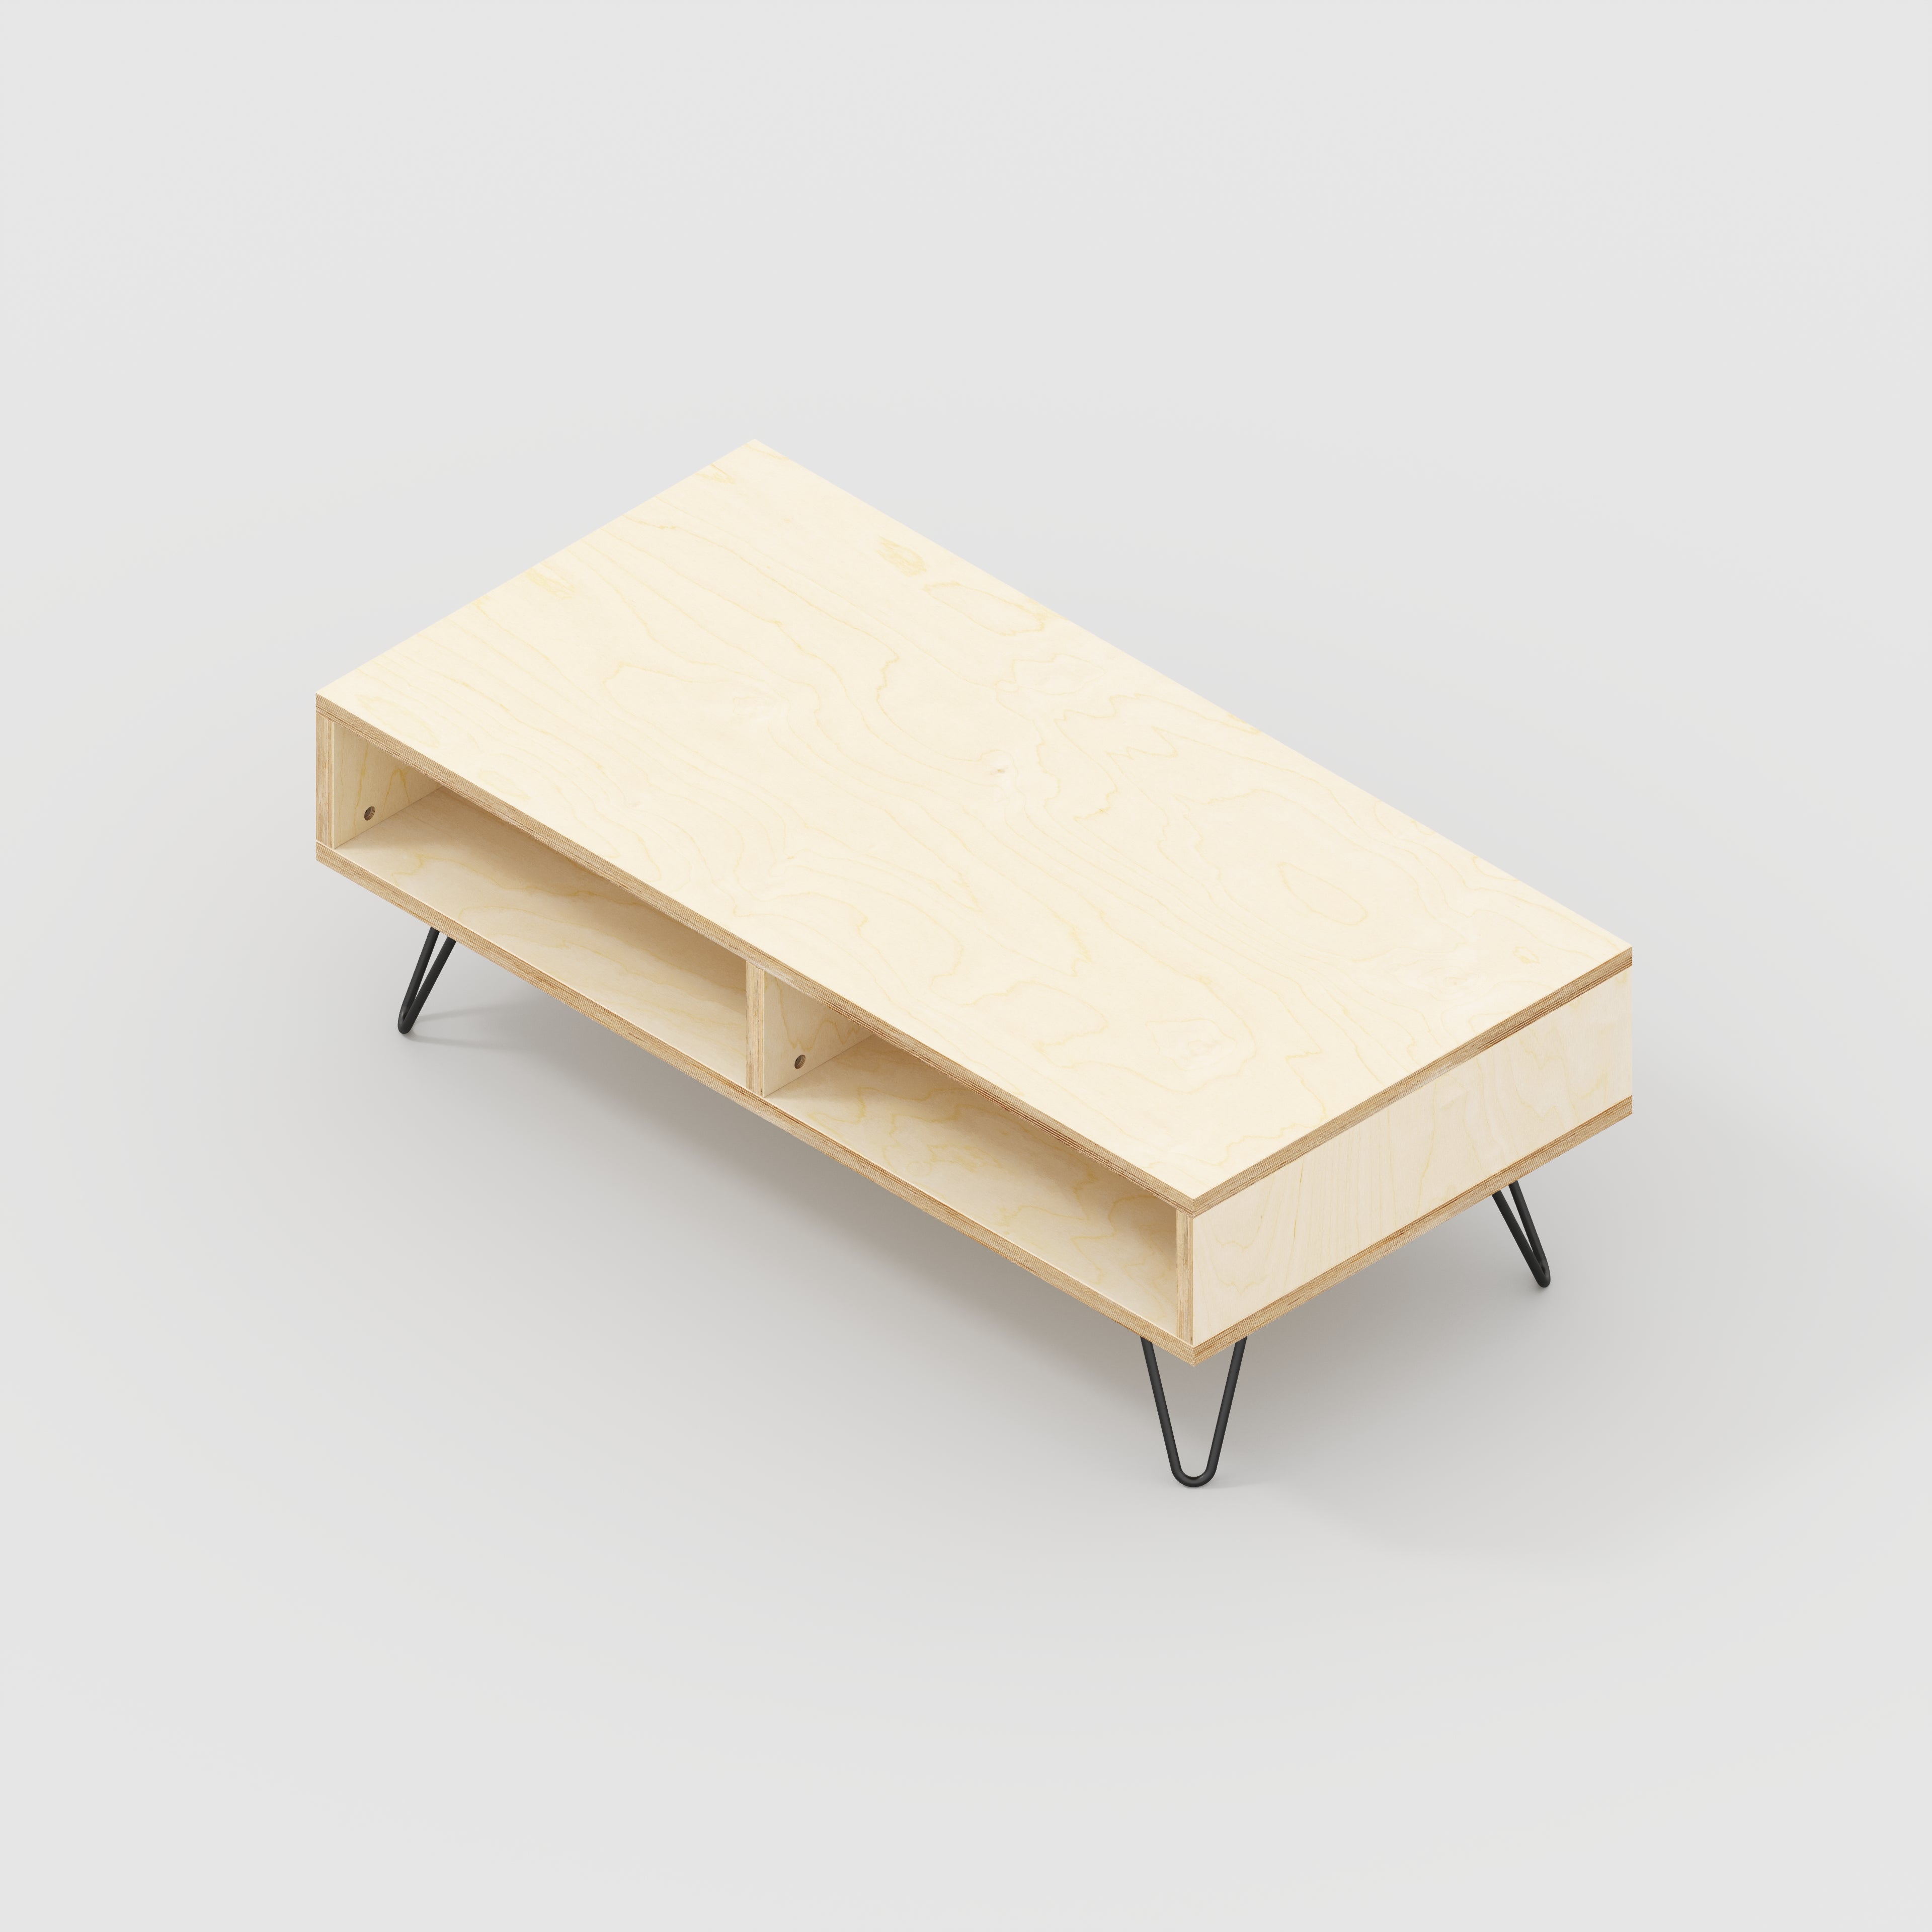 Coffee Table with Box Storage and Black Hairpin Legs - Plywood Birch - 1200(w) x 600(d) x 400(h)